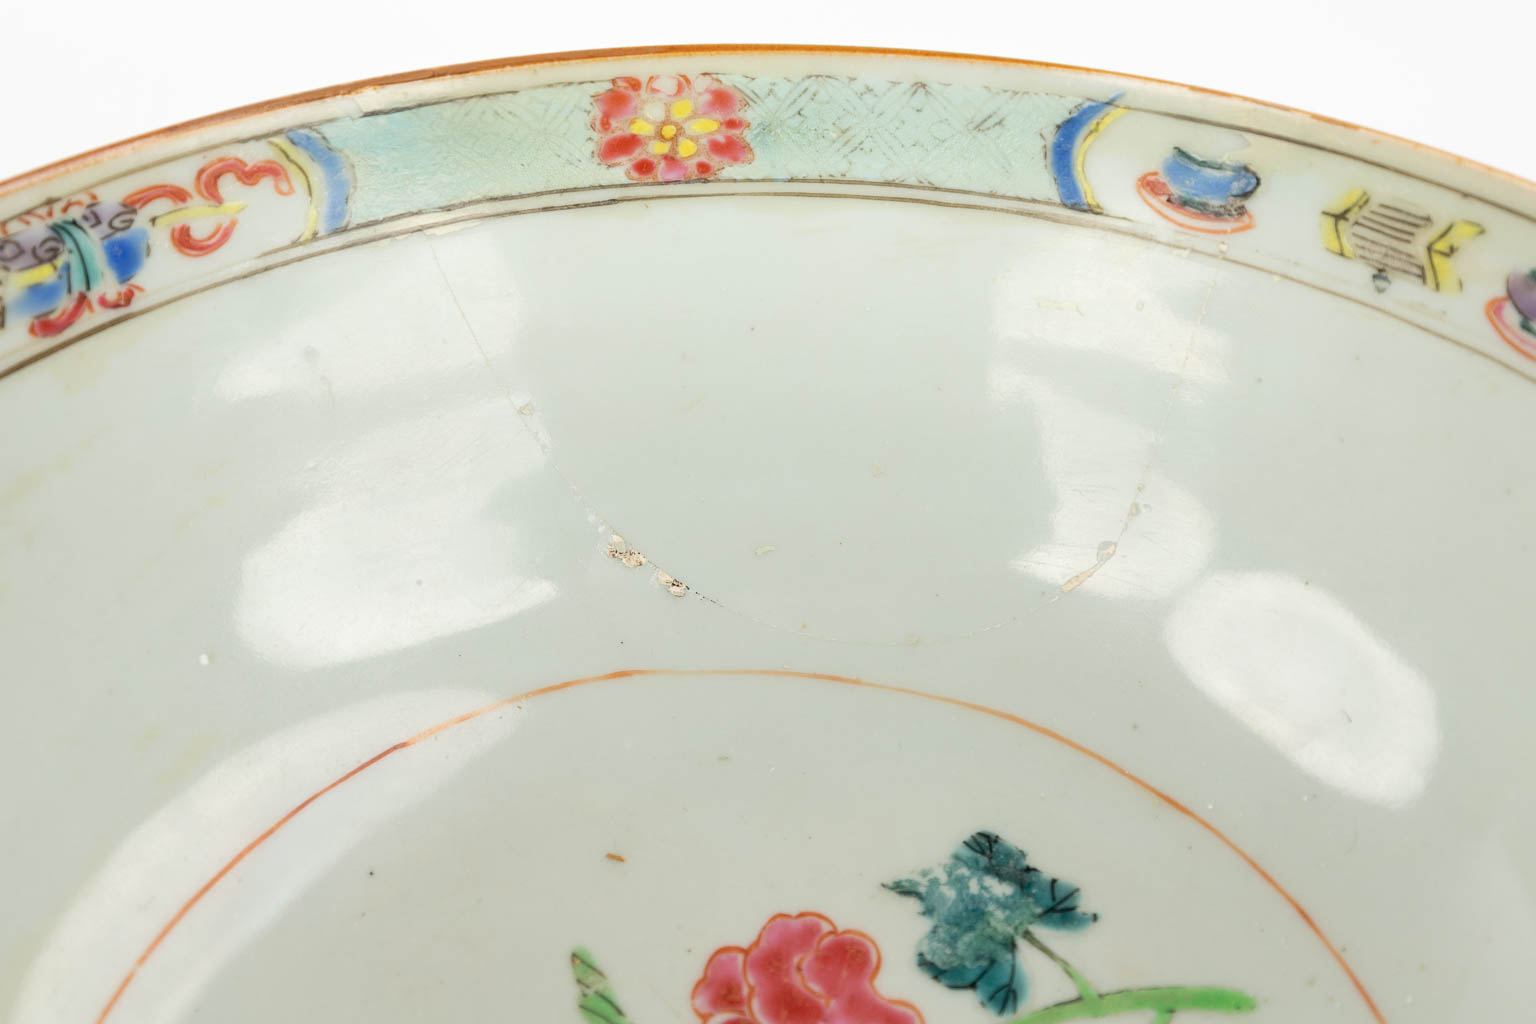 A set of 3 large Chinese Famille Rose bowls, with floral decor. Qianlong period. (H: 9 x D: 19,5 cm)